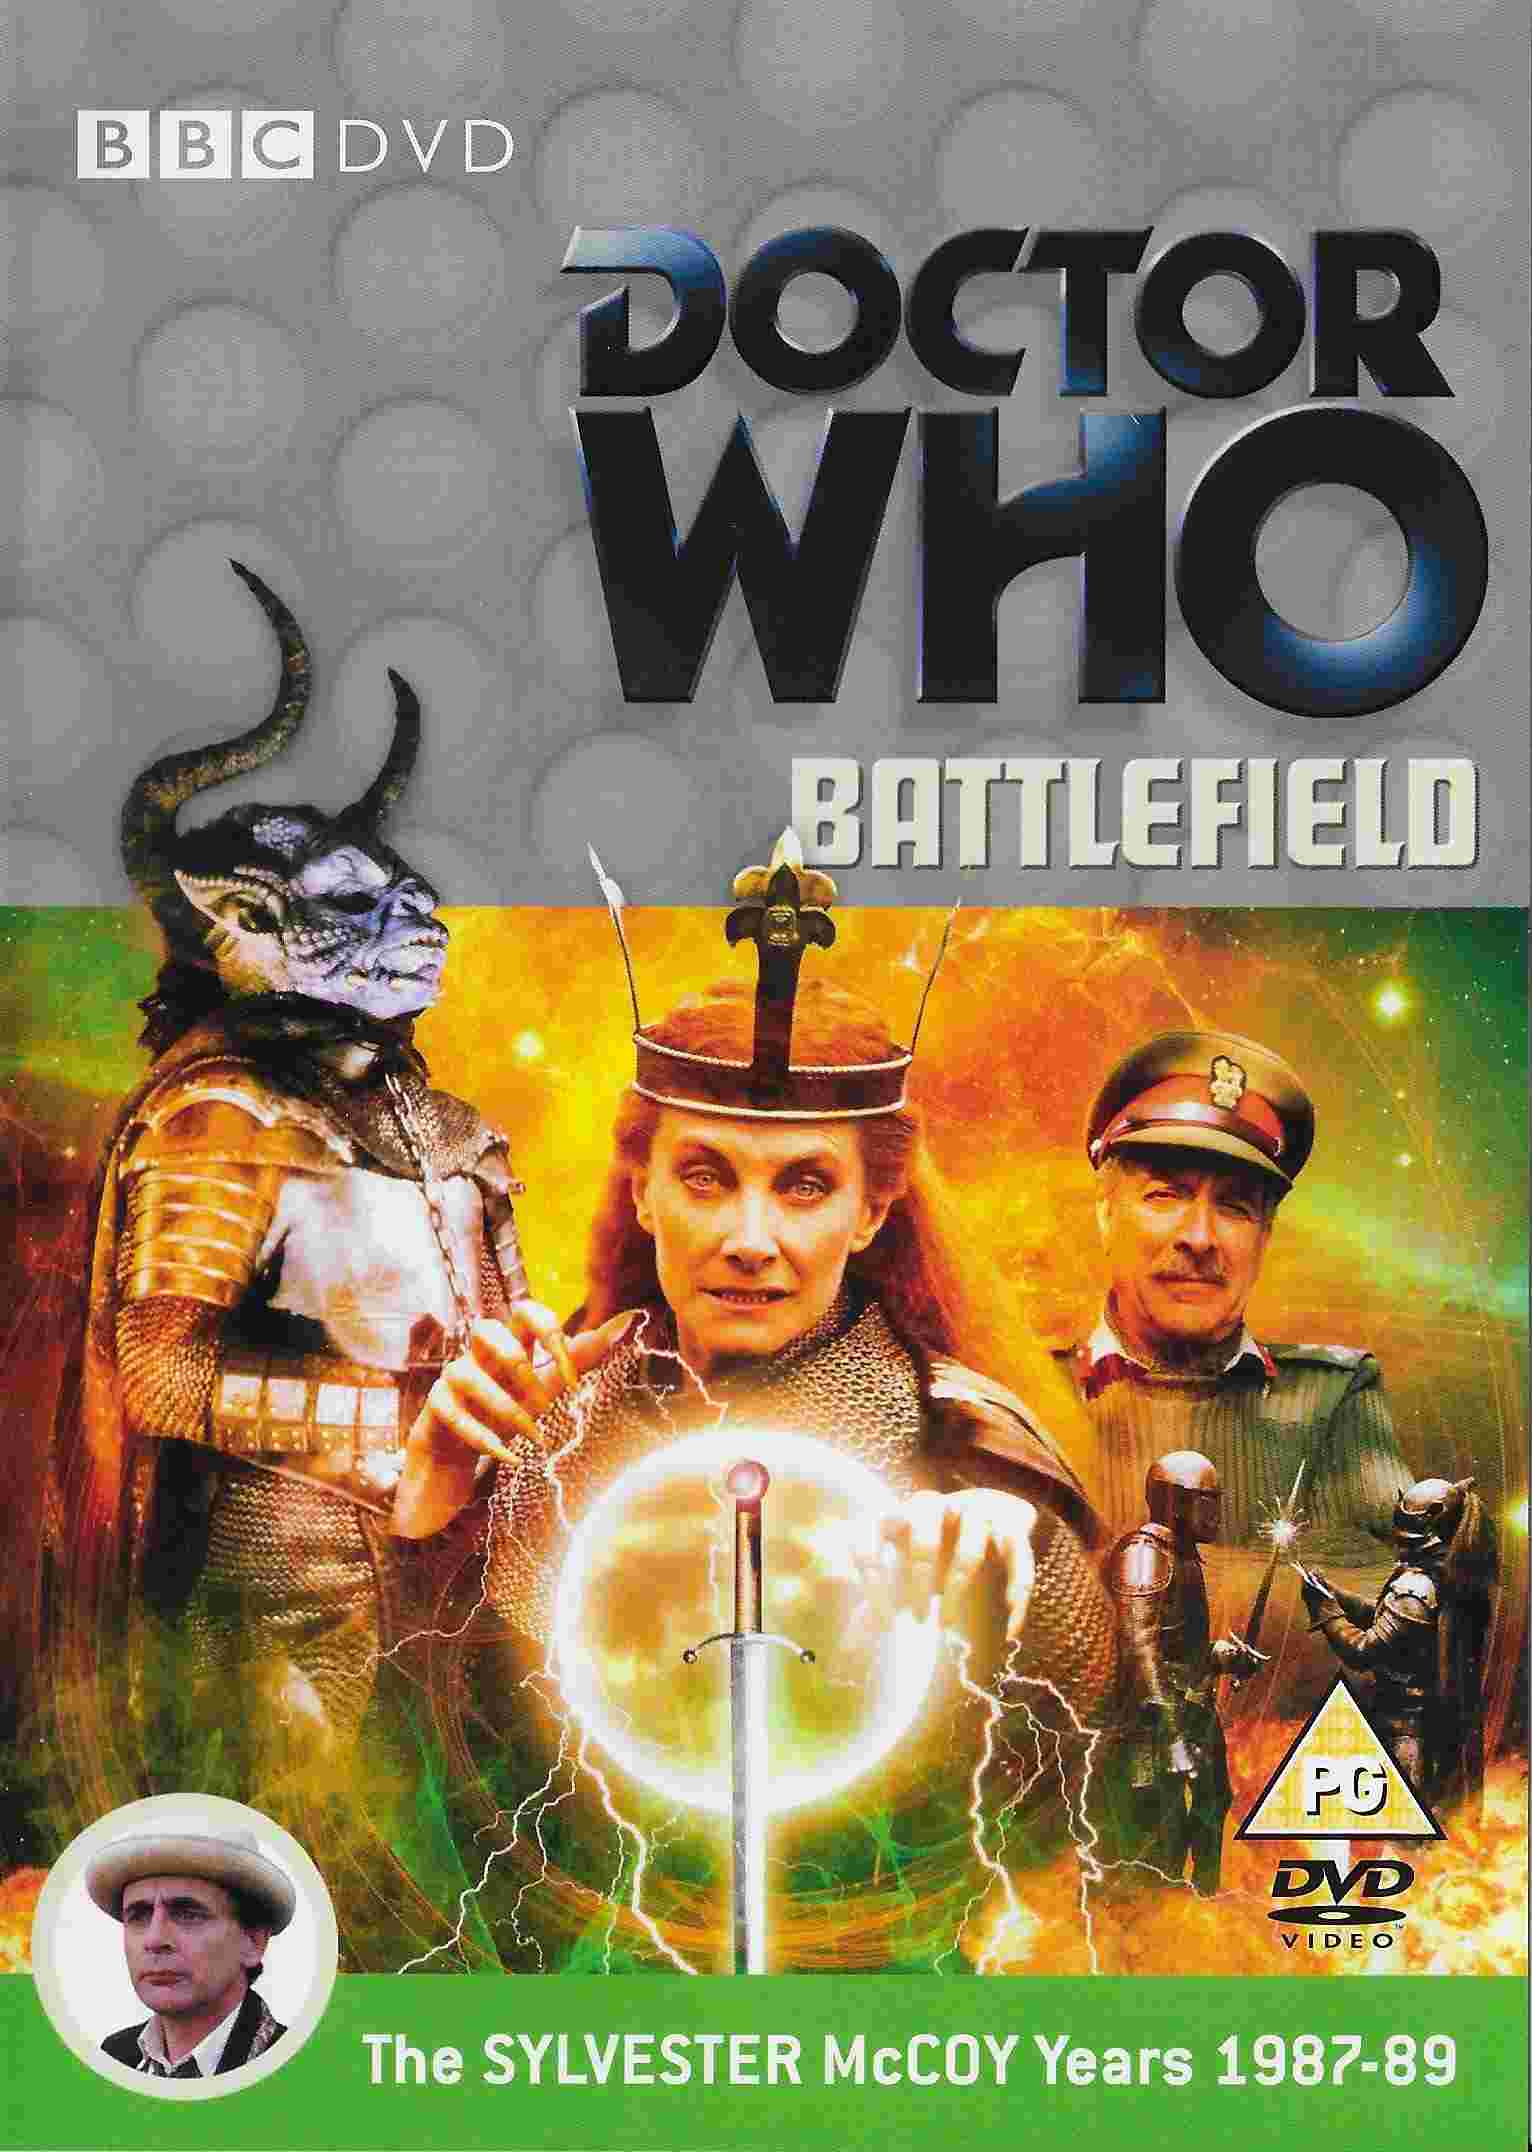 Picture of BBCDVD 2440 Doctor Who - Battlefield by artist Ben Aaronovitch from the BBC dvds - Records and Tapes library